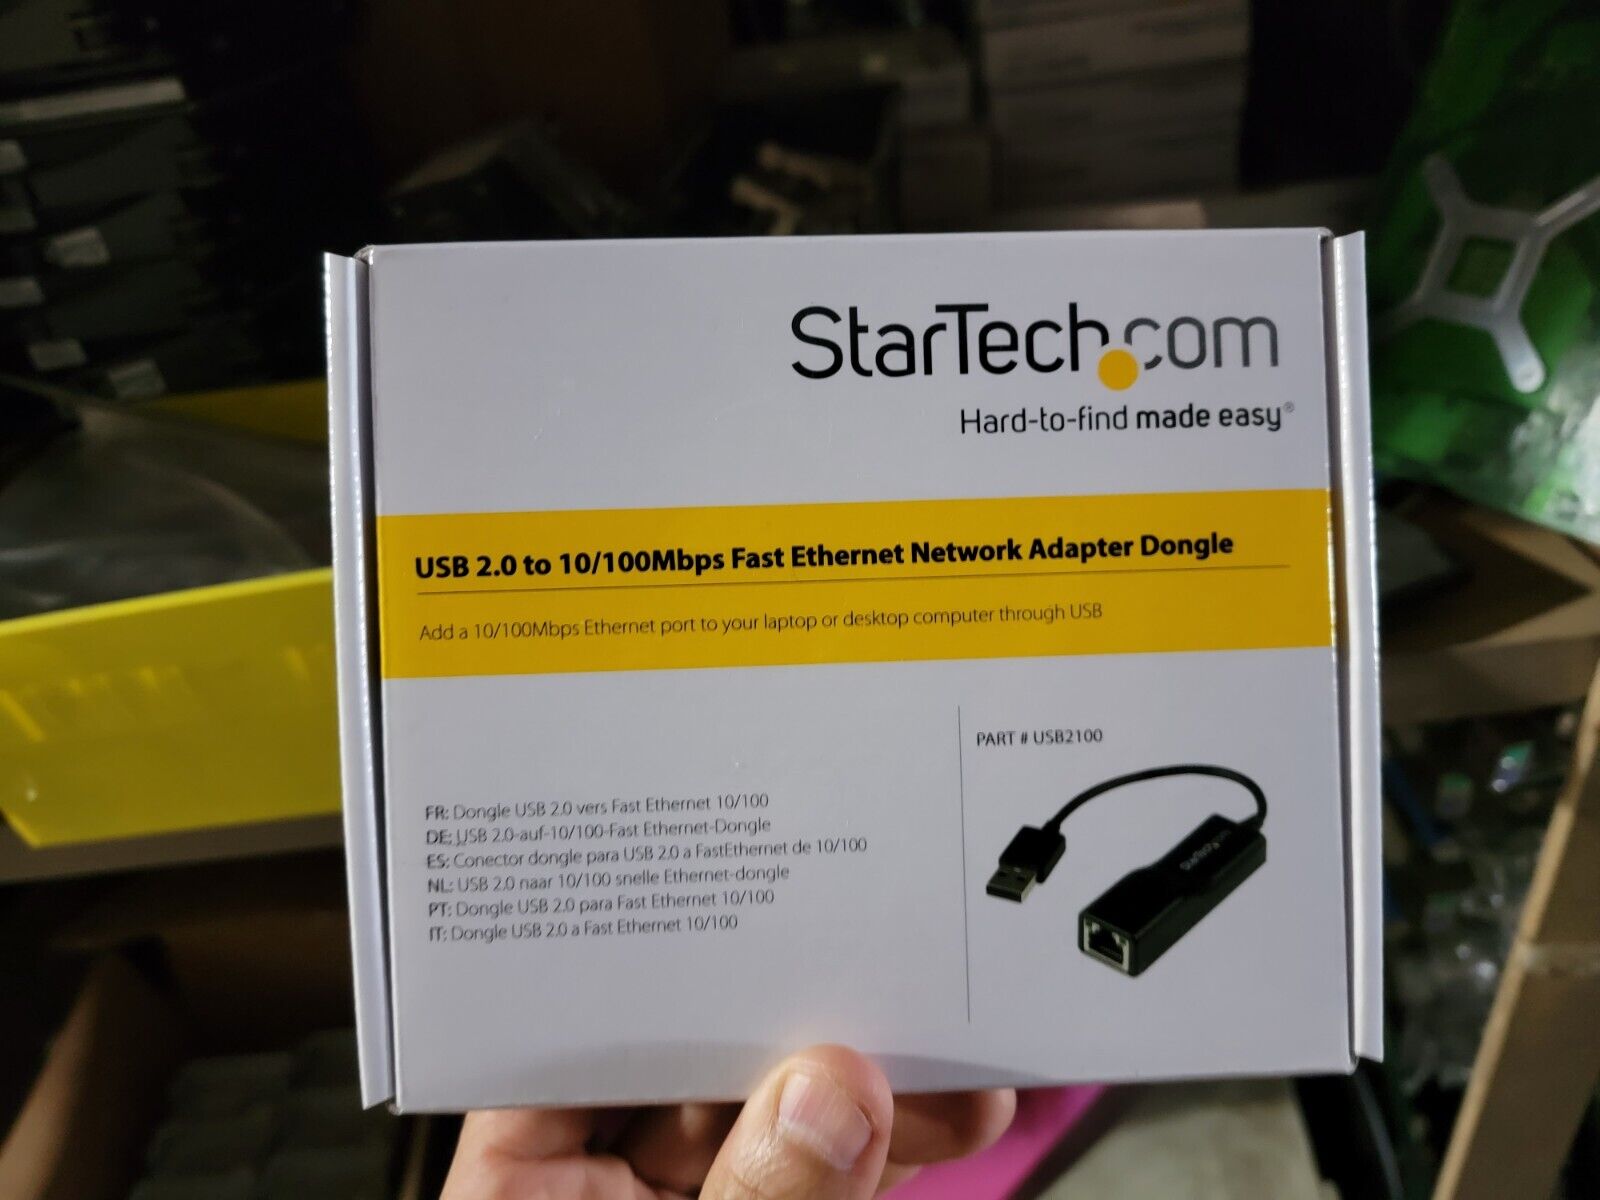 Startech USB2100 USB 2.0 to 10/100 Mbps Ethernet Network Adapter Dongle